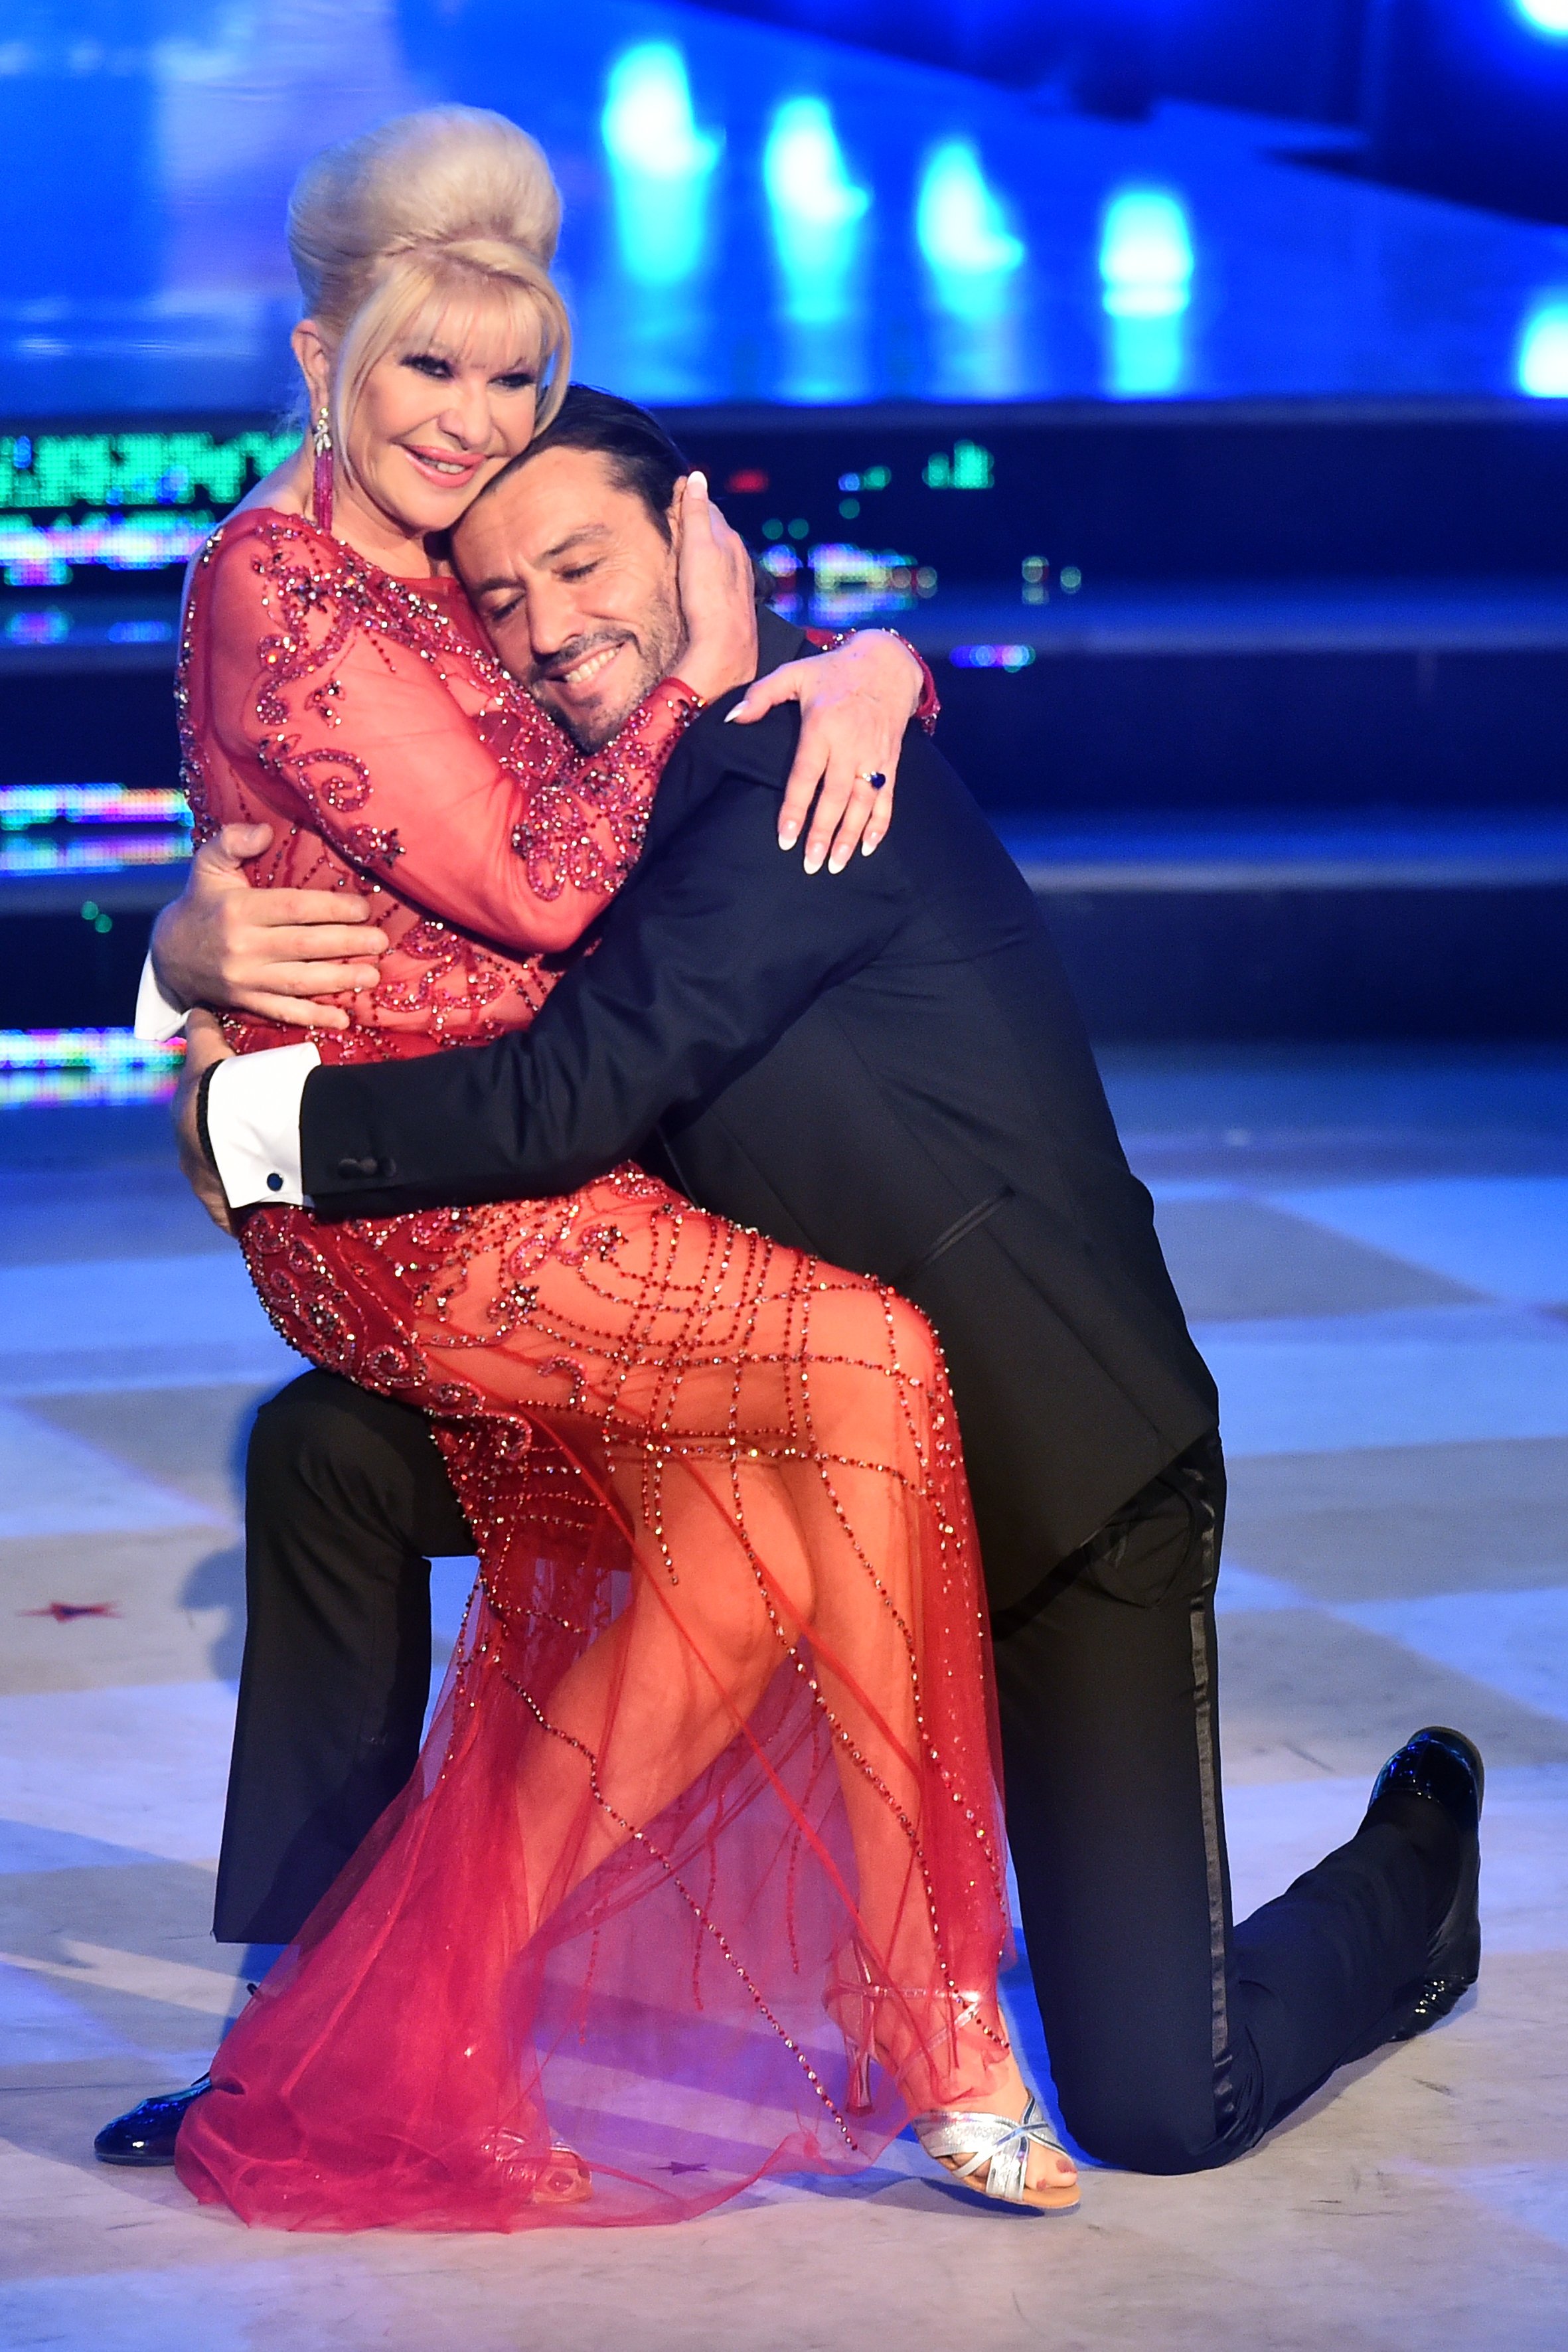 Ivana Trump and Rossano Rubicondi as guests of "Dancing with the Stars" on May 6, 2018 in Rome Italy.┃Source: Getty Images